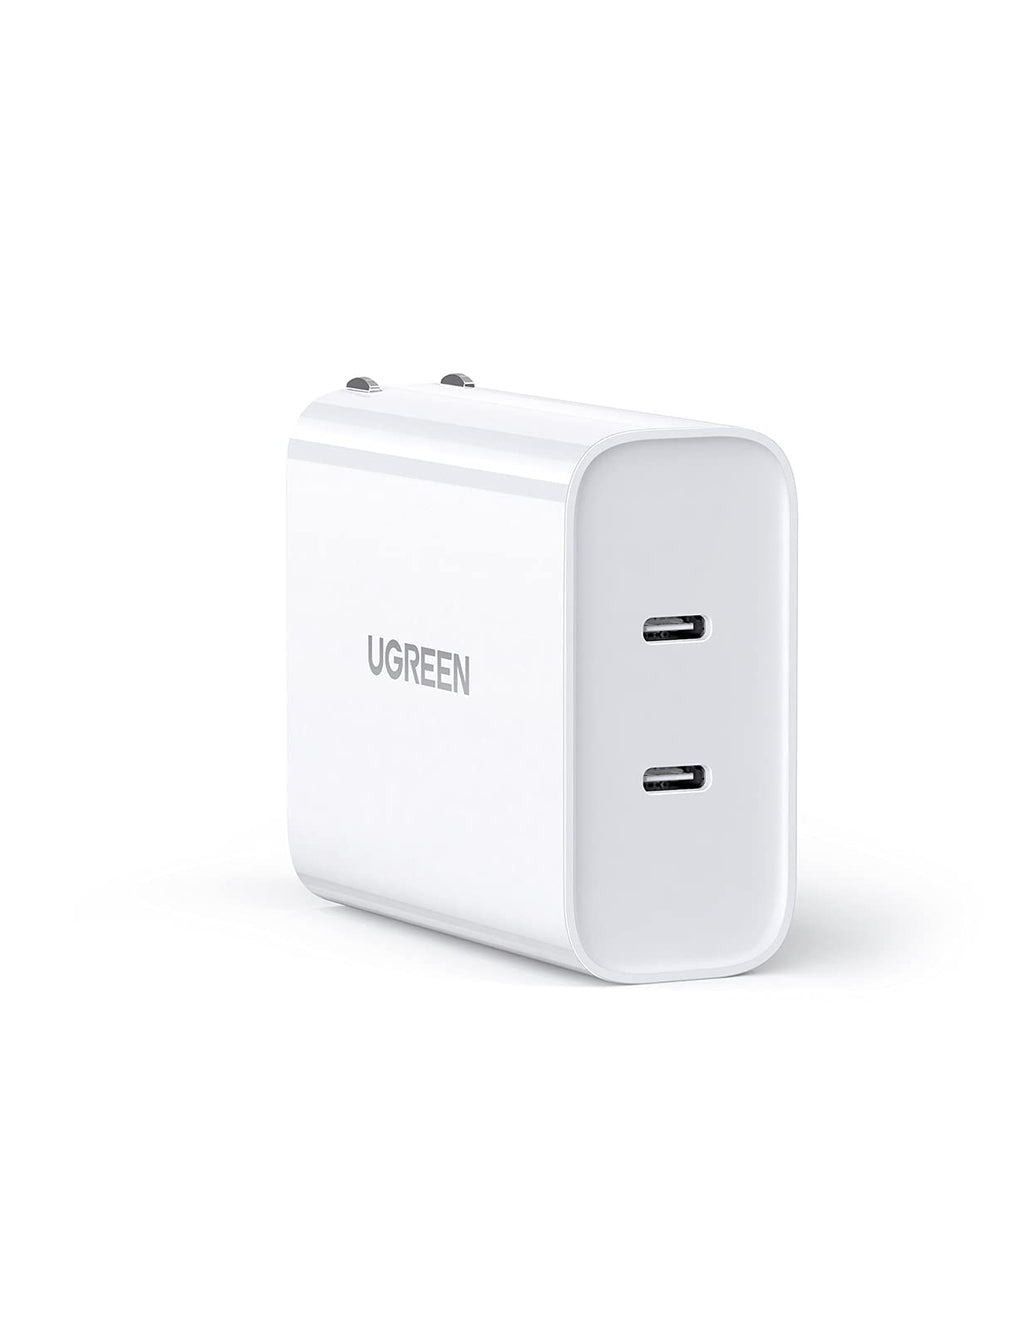  [AUSTRALIA] - UGREEN 36W Dual Ports USB C Wall Charger - 2-Port Fast Charger USB-C Power Adapter Compatible for iPhone 13/13 Mini/13 Pro/13 Pro Max/12/12 Pro Max, iPad Mini/Pro, Pixel, Galaxy Note20/S20